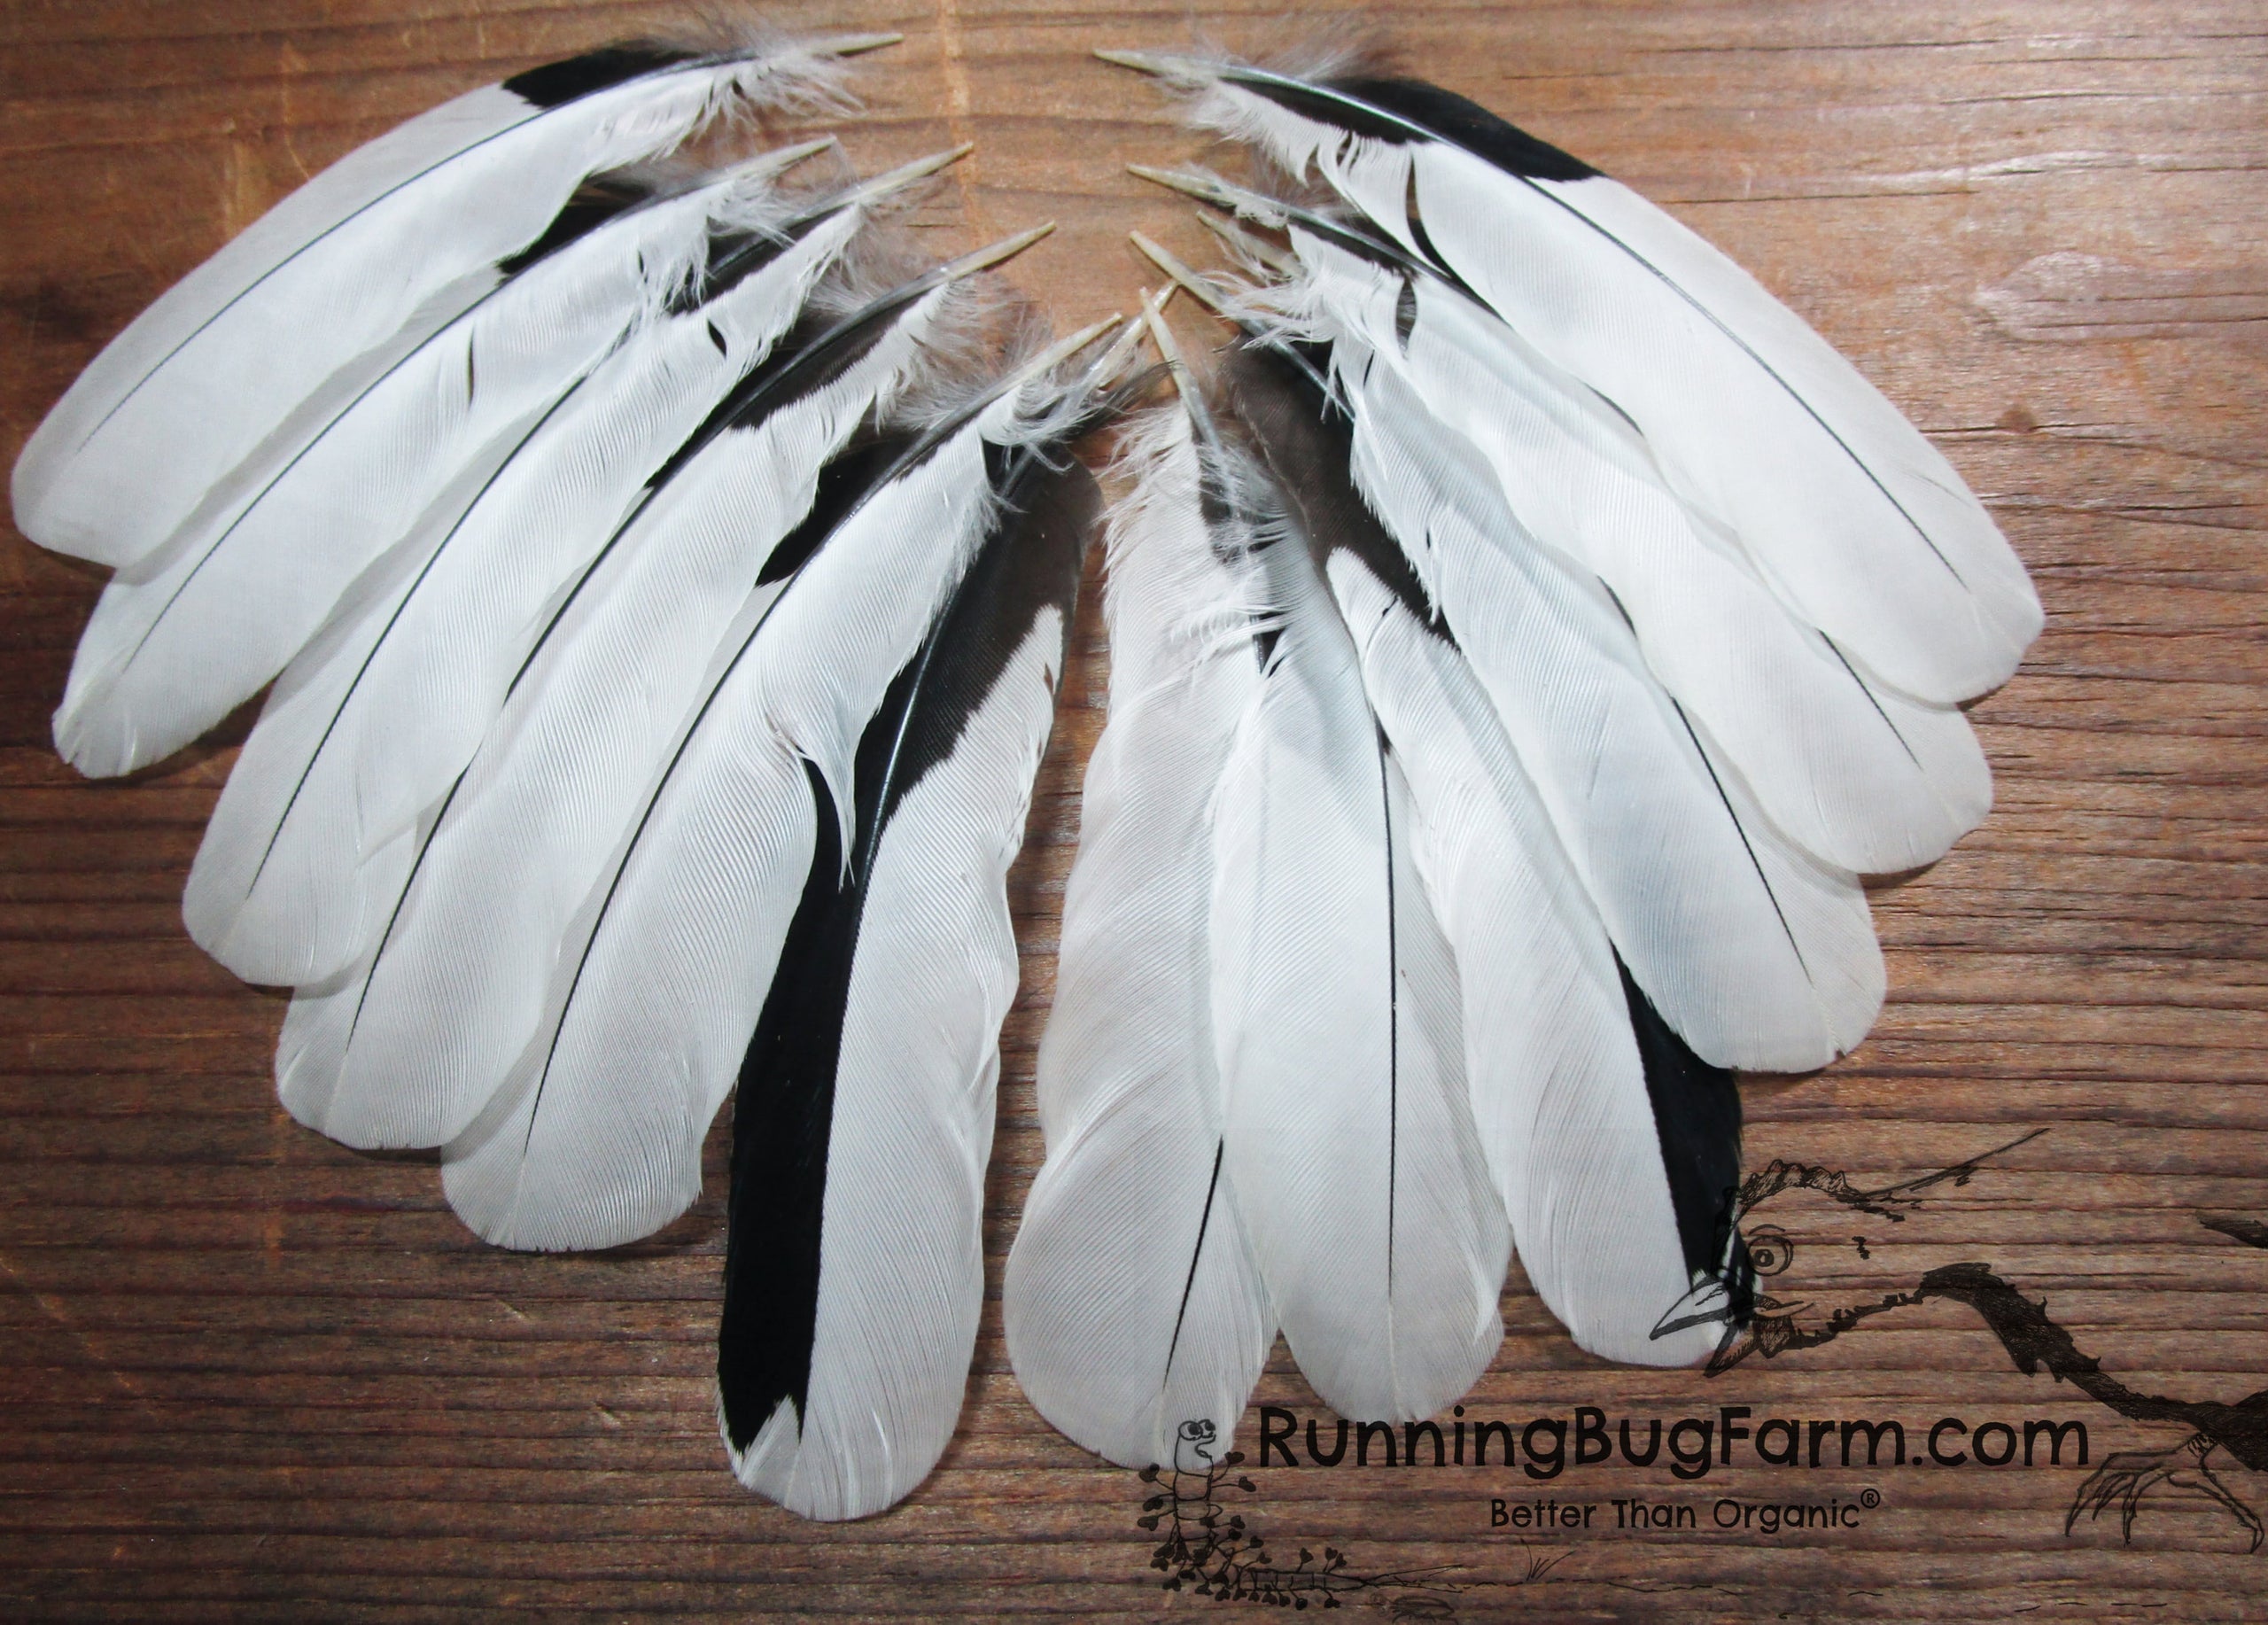 Black and White Barnyard Bird Wing Feathers Qty: 12 Size: 3-3.5